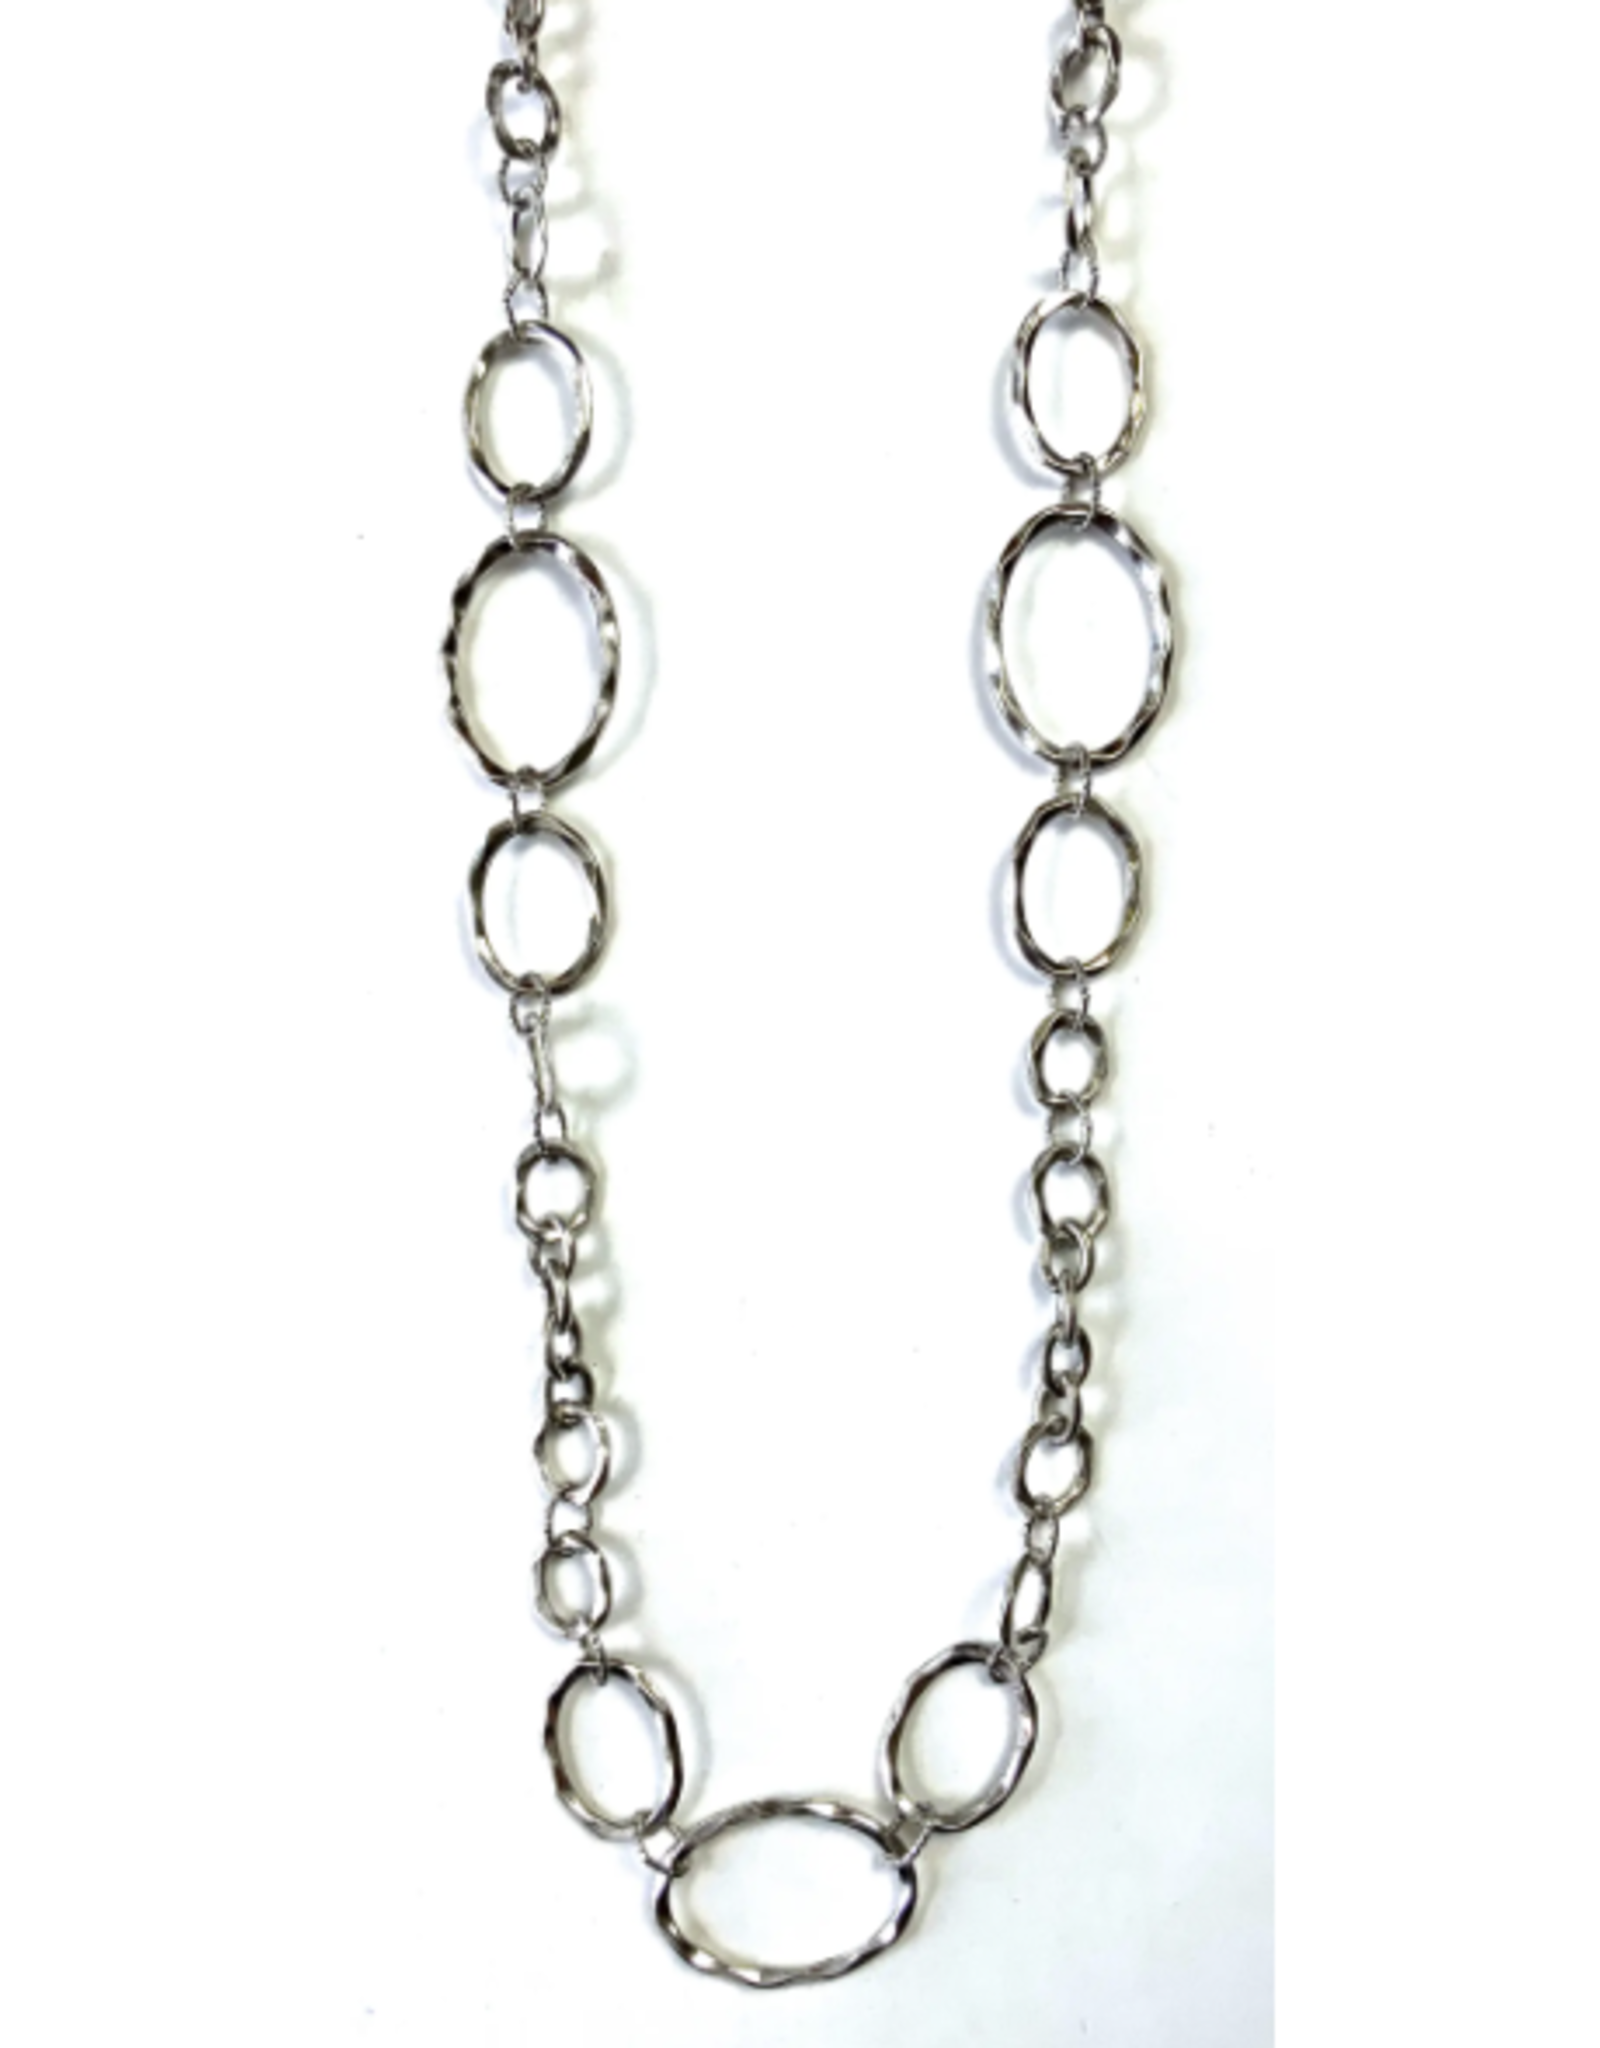 Silver Long Chain Rings Necklace